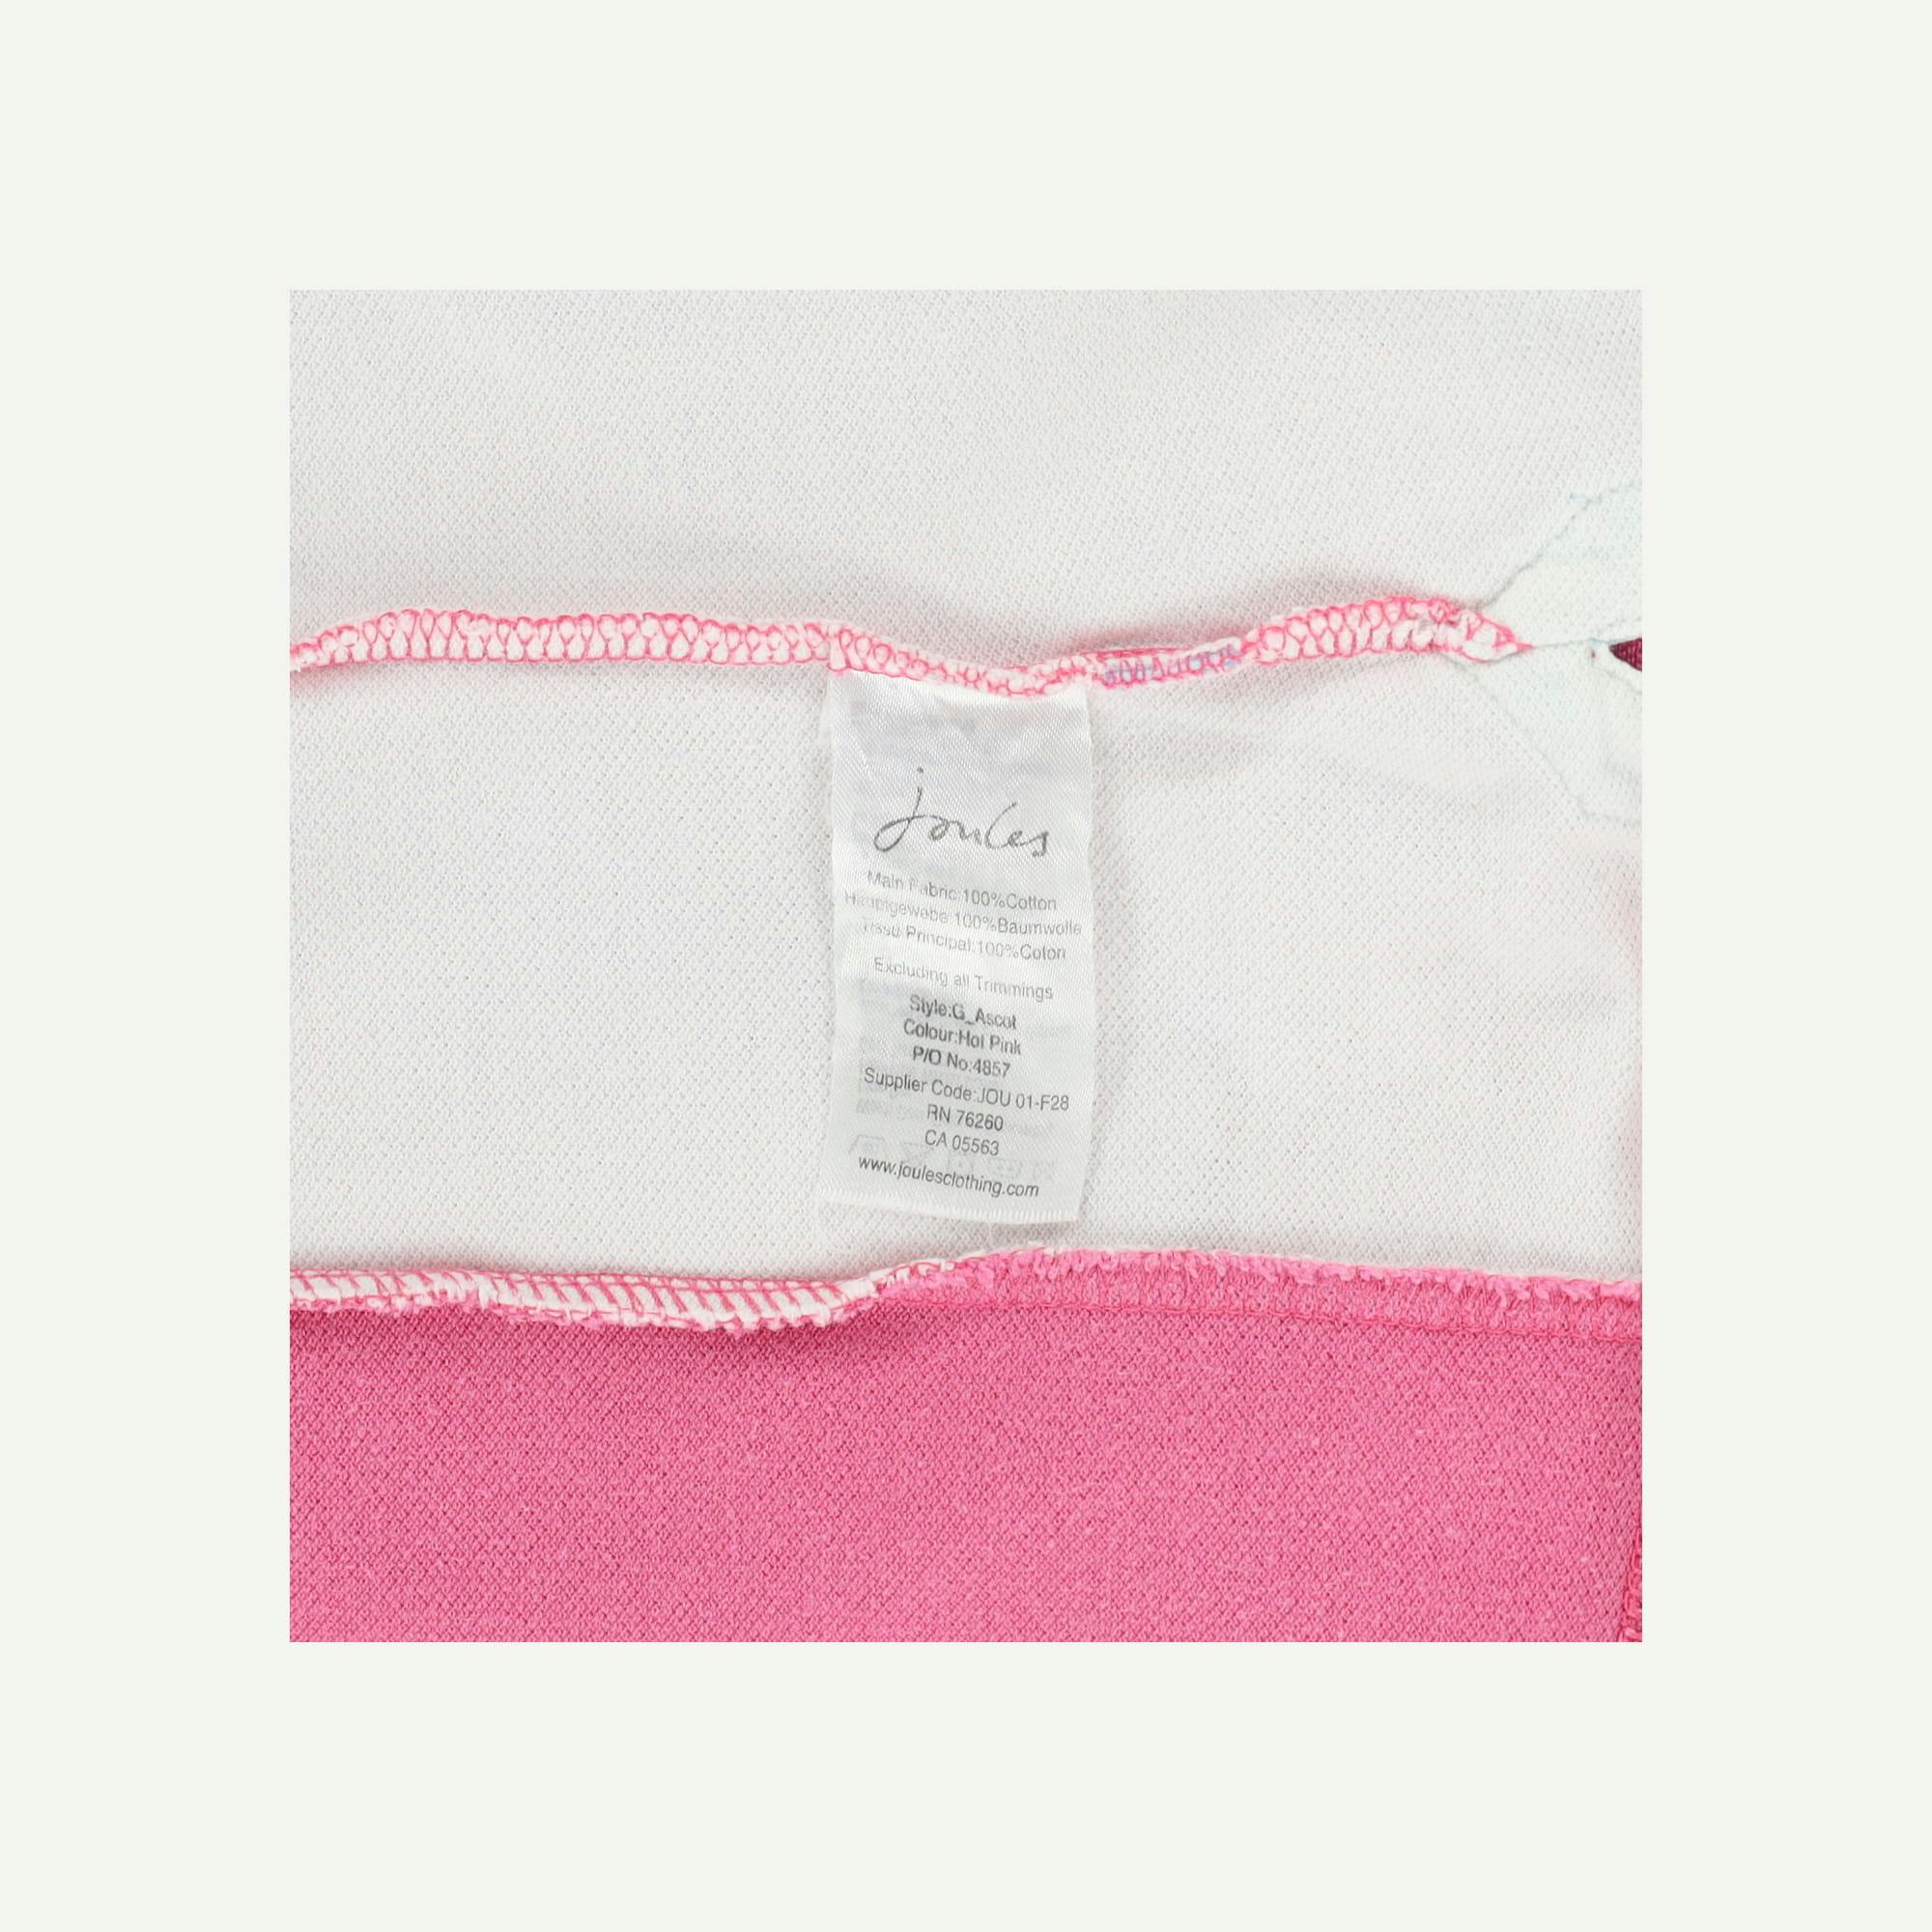 Joules Pre-loved Pink Polo Shirt